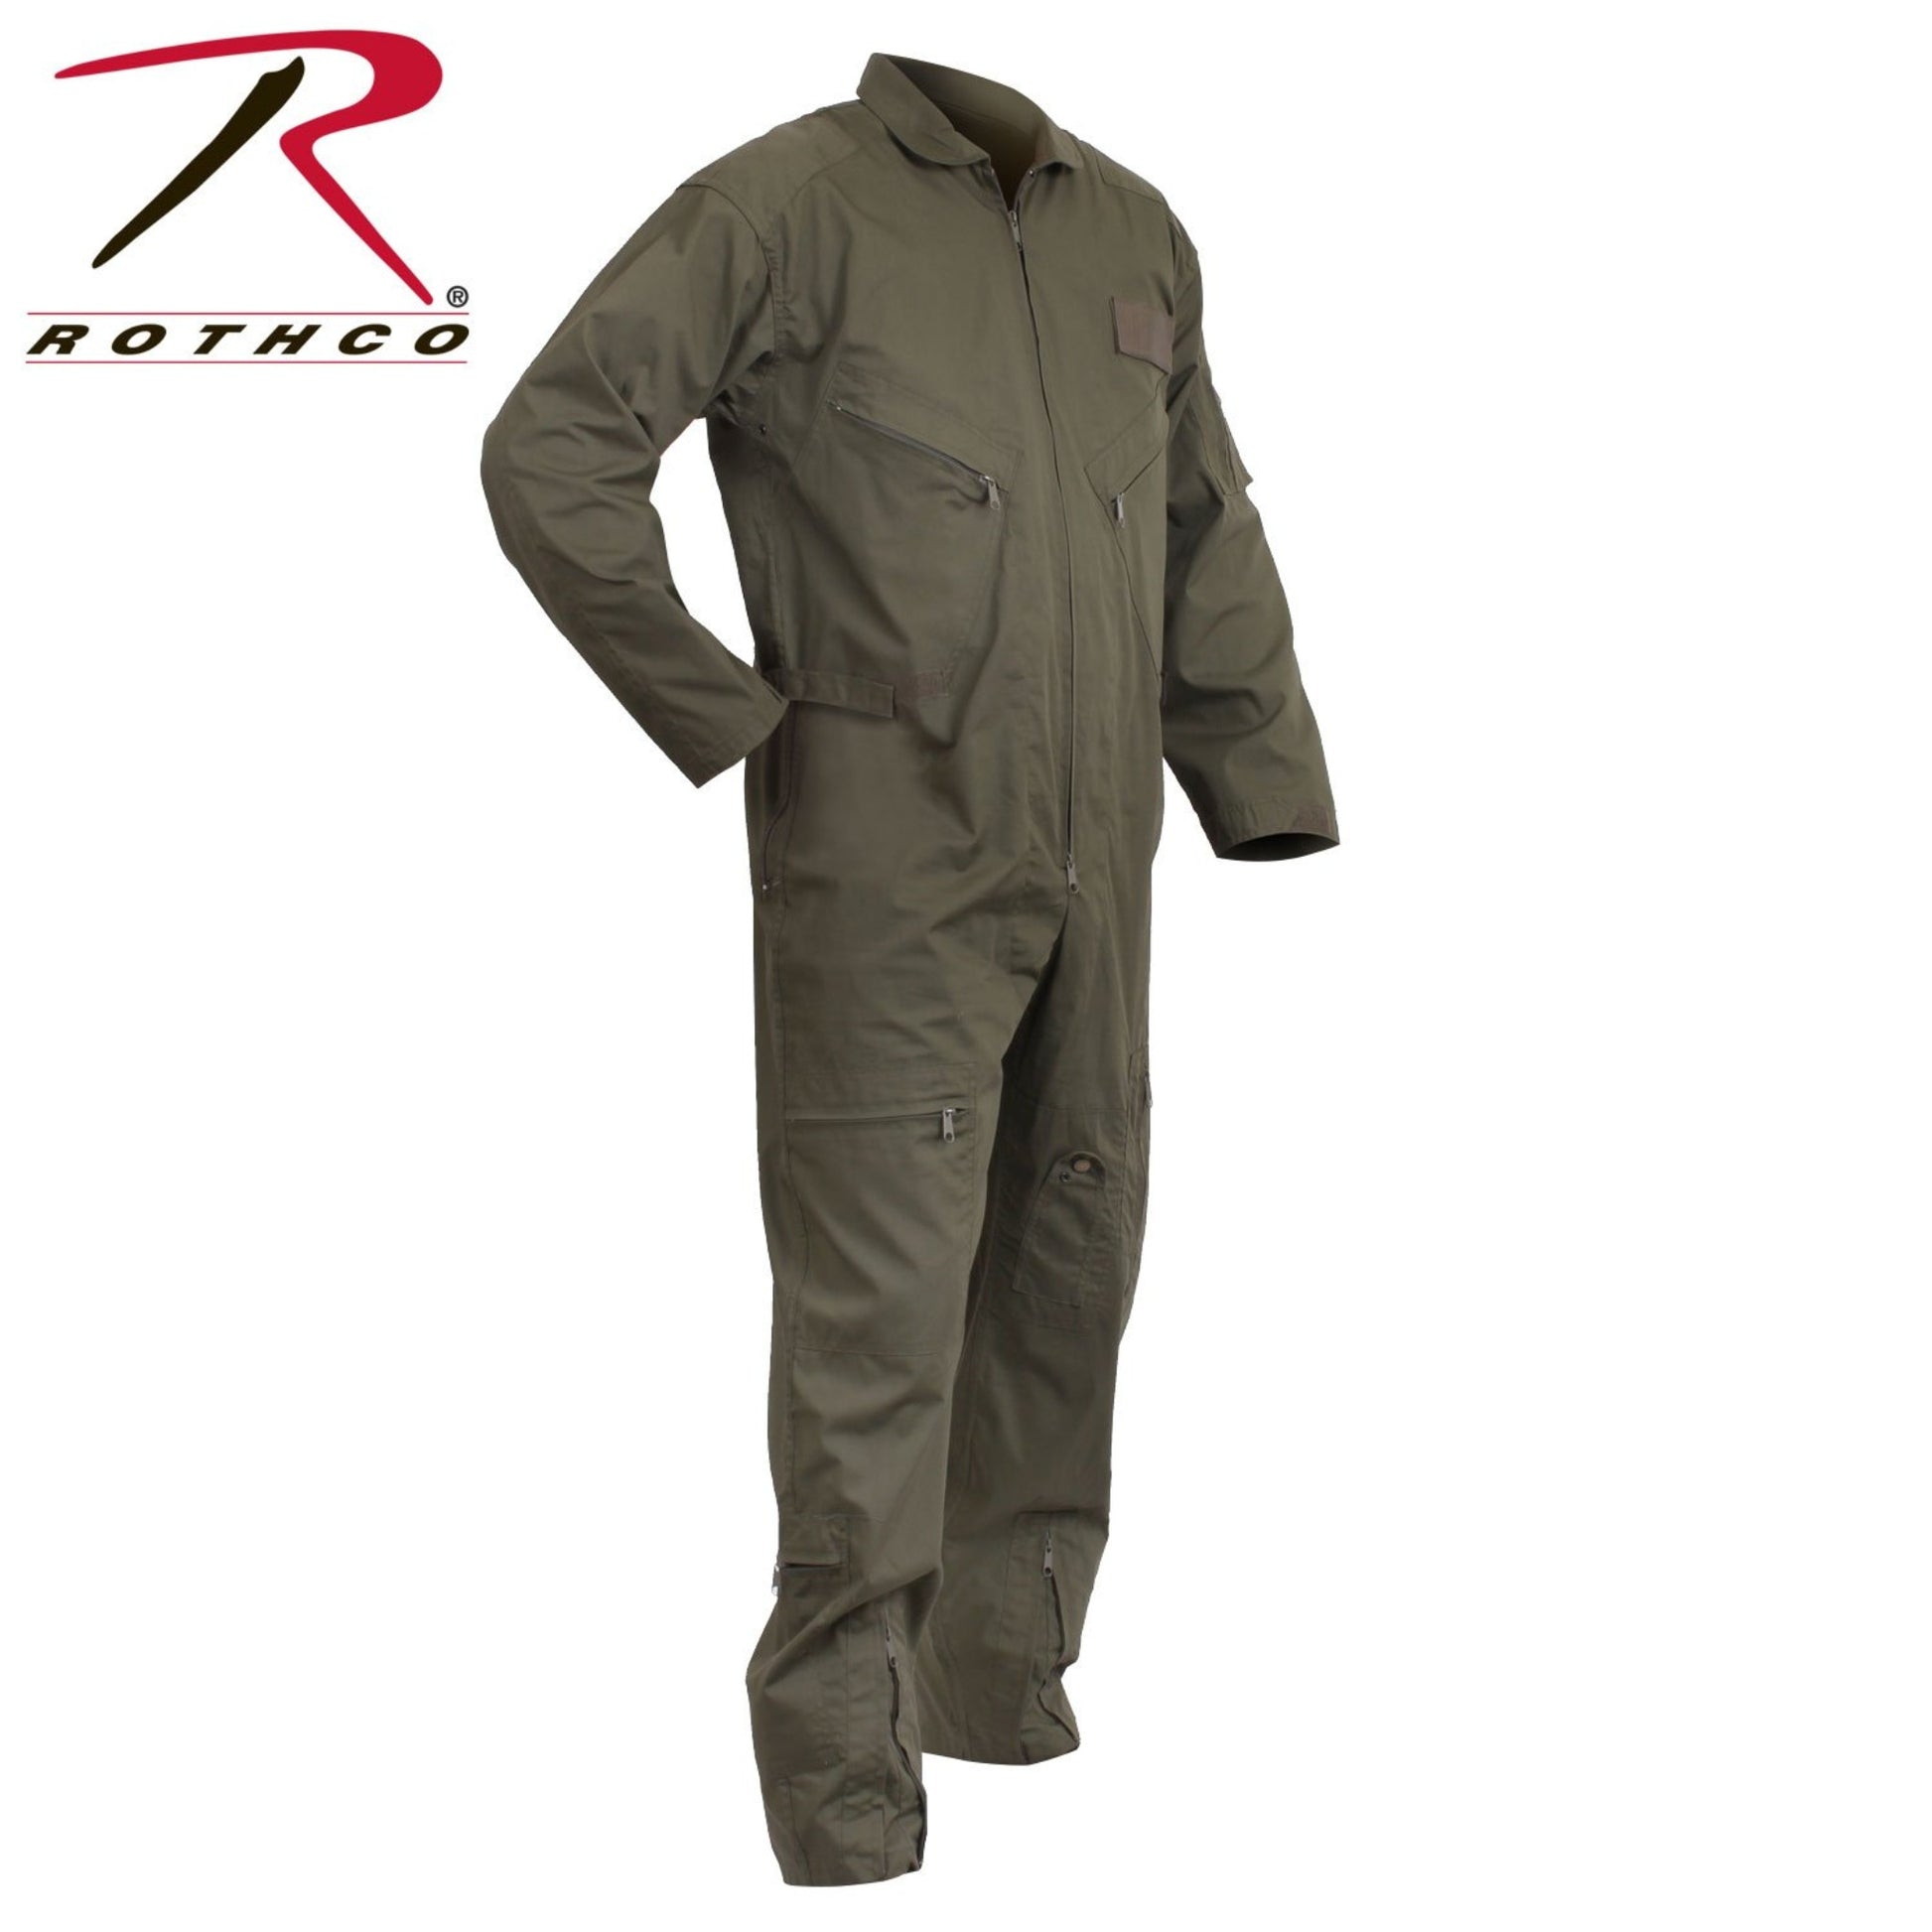 Flight Suit From Rothco